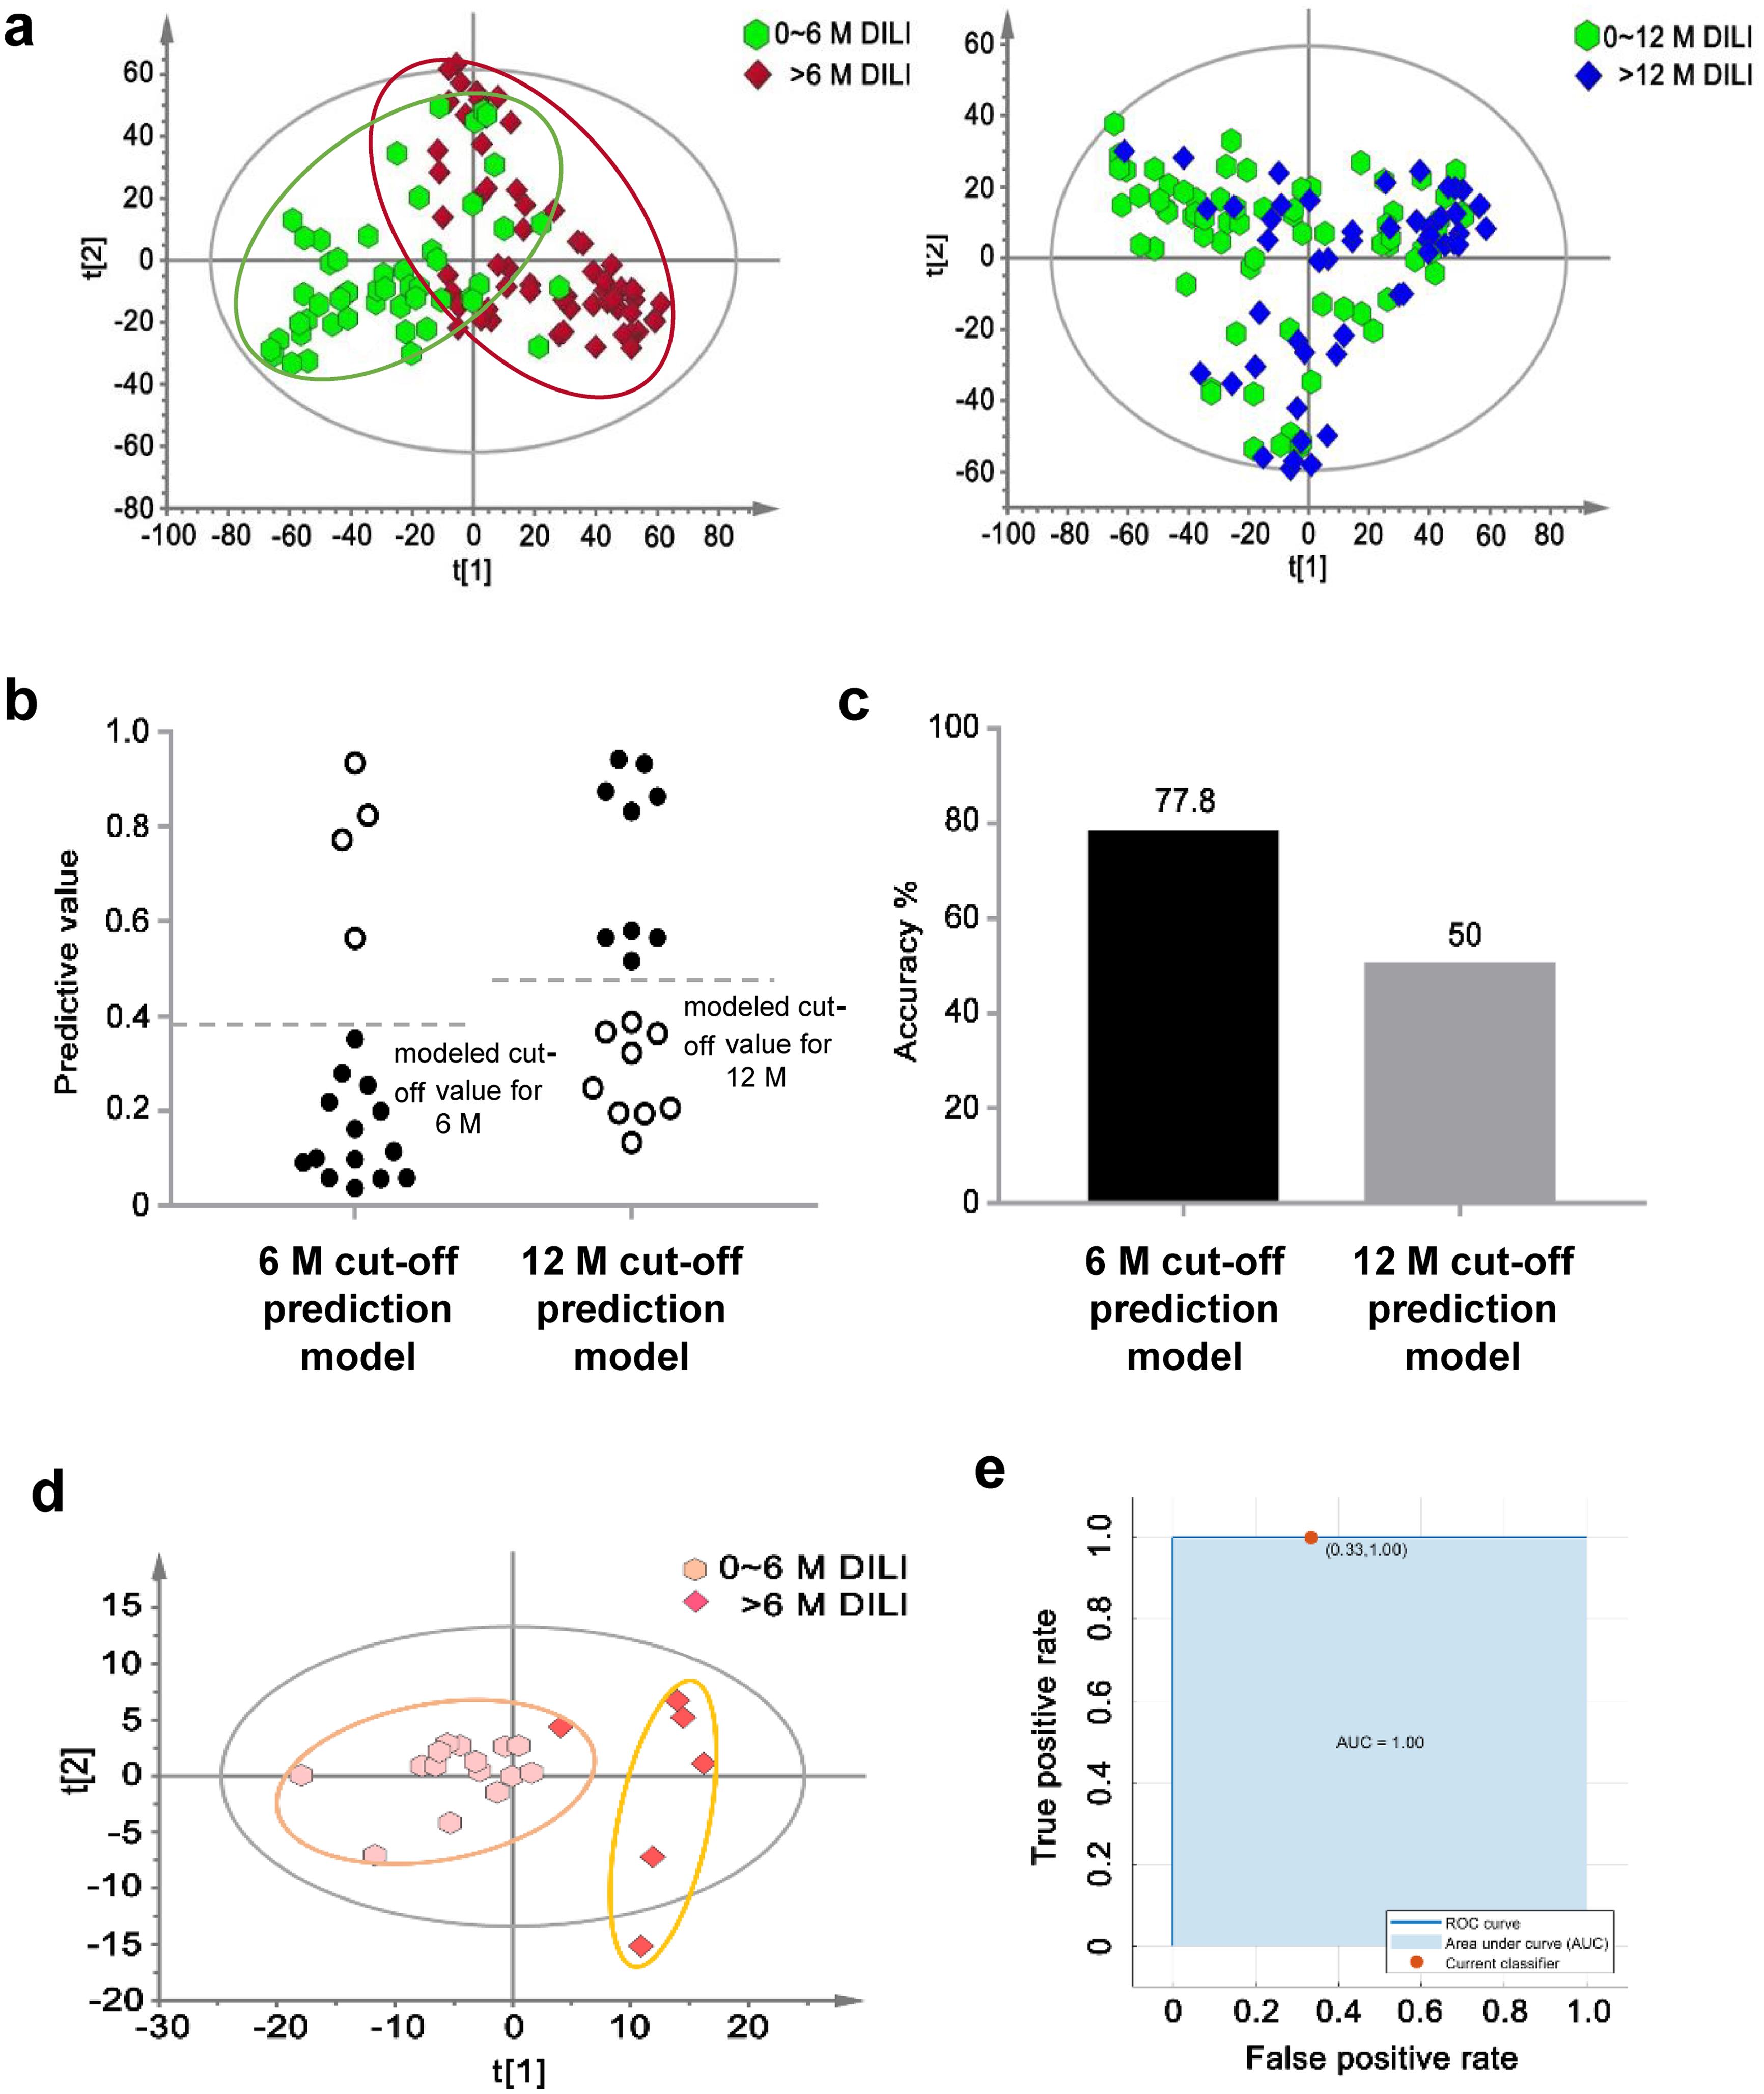 Unsupervised multivariant analysis on the clustering pattern of DILI groups with different liver injury duration and predictive accuracy and external validation in the prospective cohort of Center 2 by LDA modelling at different cut-off points.